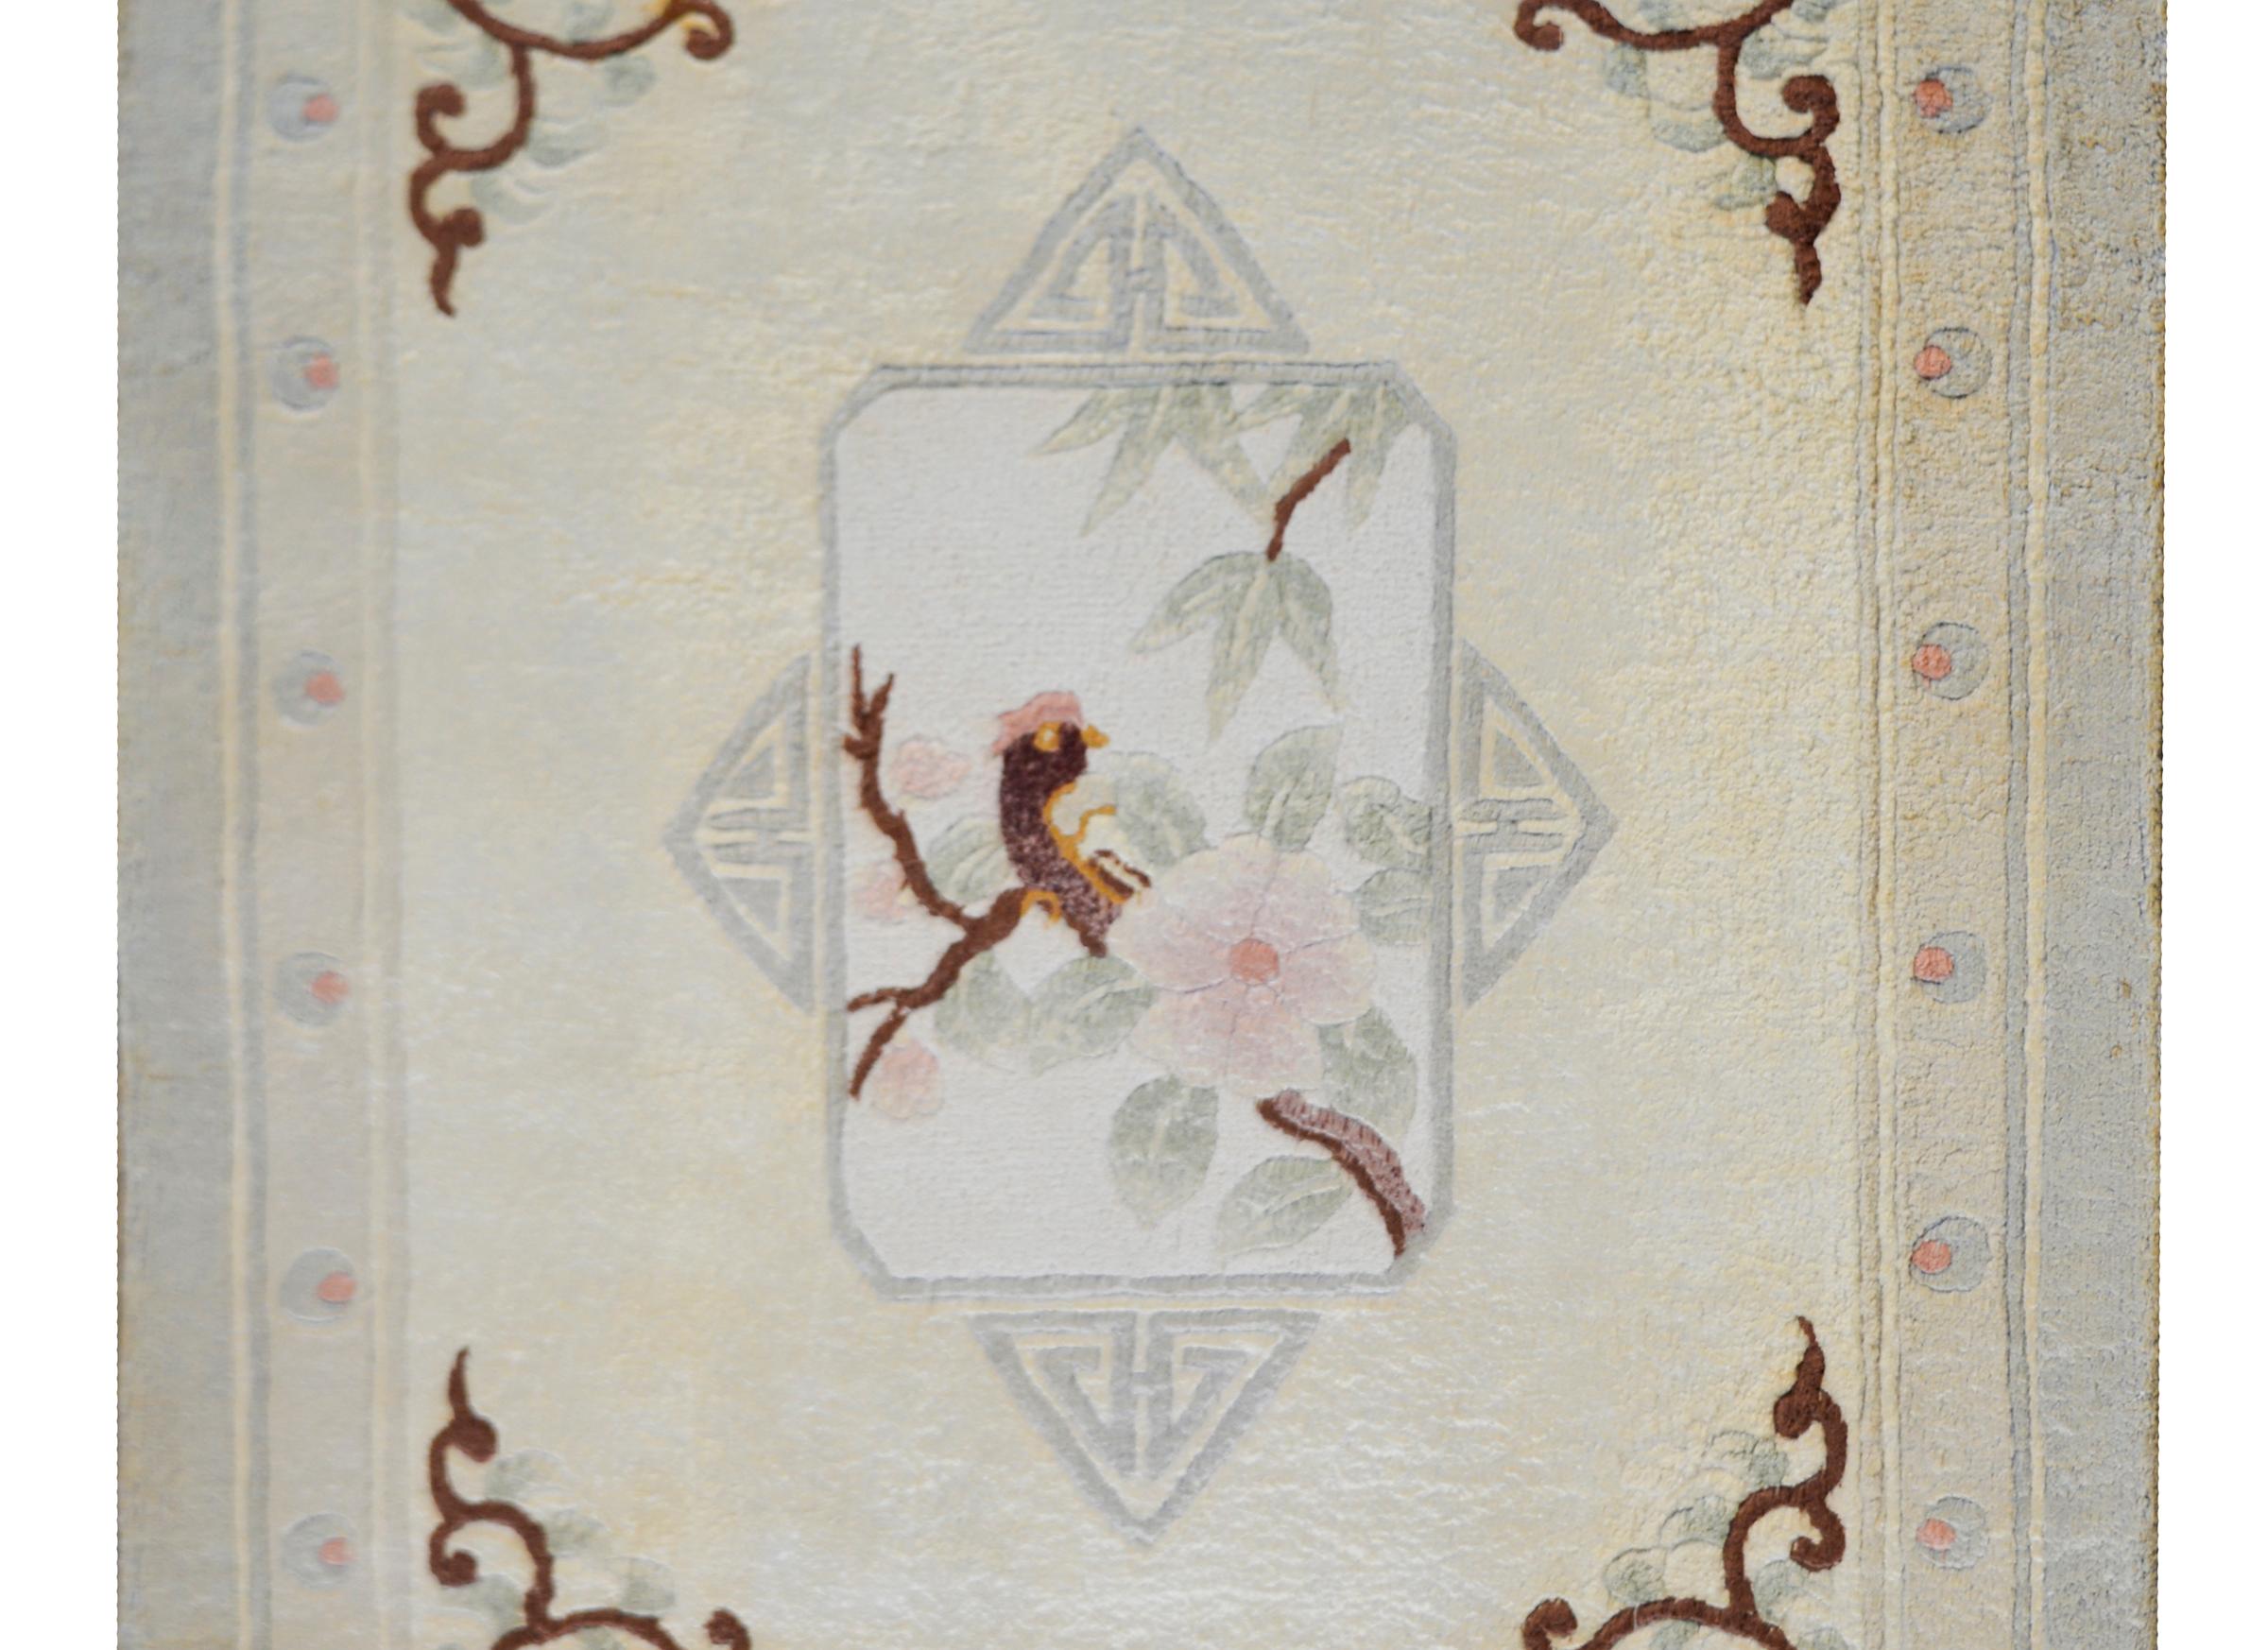 A simple but beautiful hand woven Chinese silk rug depicting a central medallion of a phoenix resting on the branch of cherry tree with a blossom on the foreground. The medallion is surrounded by more cherry blossoms against a cream colors